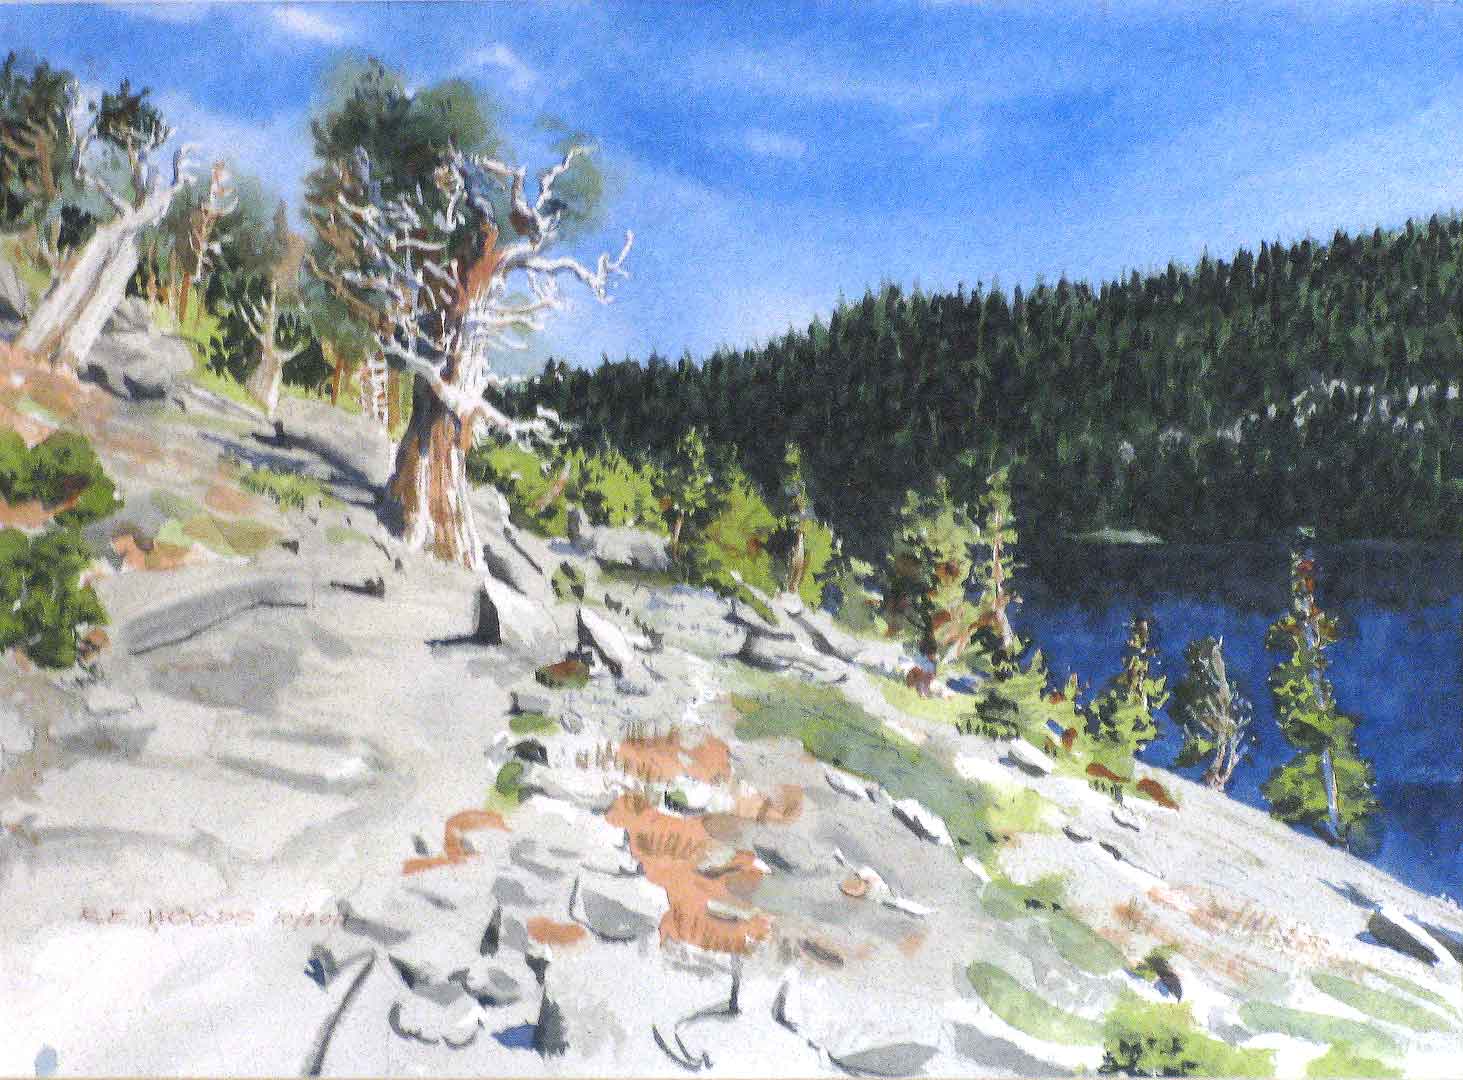 The Sentinel, Echo Lake, Watercolor on paper, 14 x 10.5